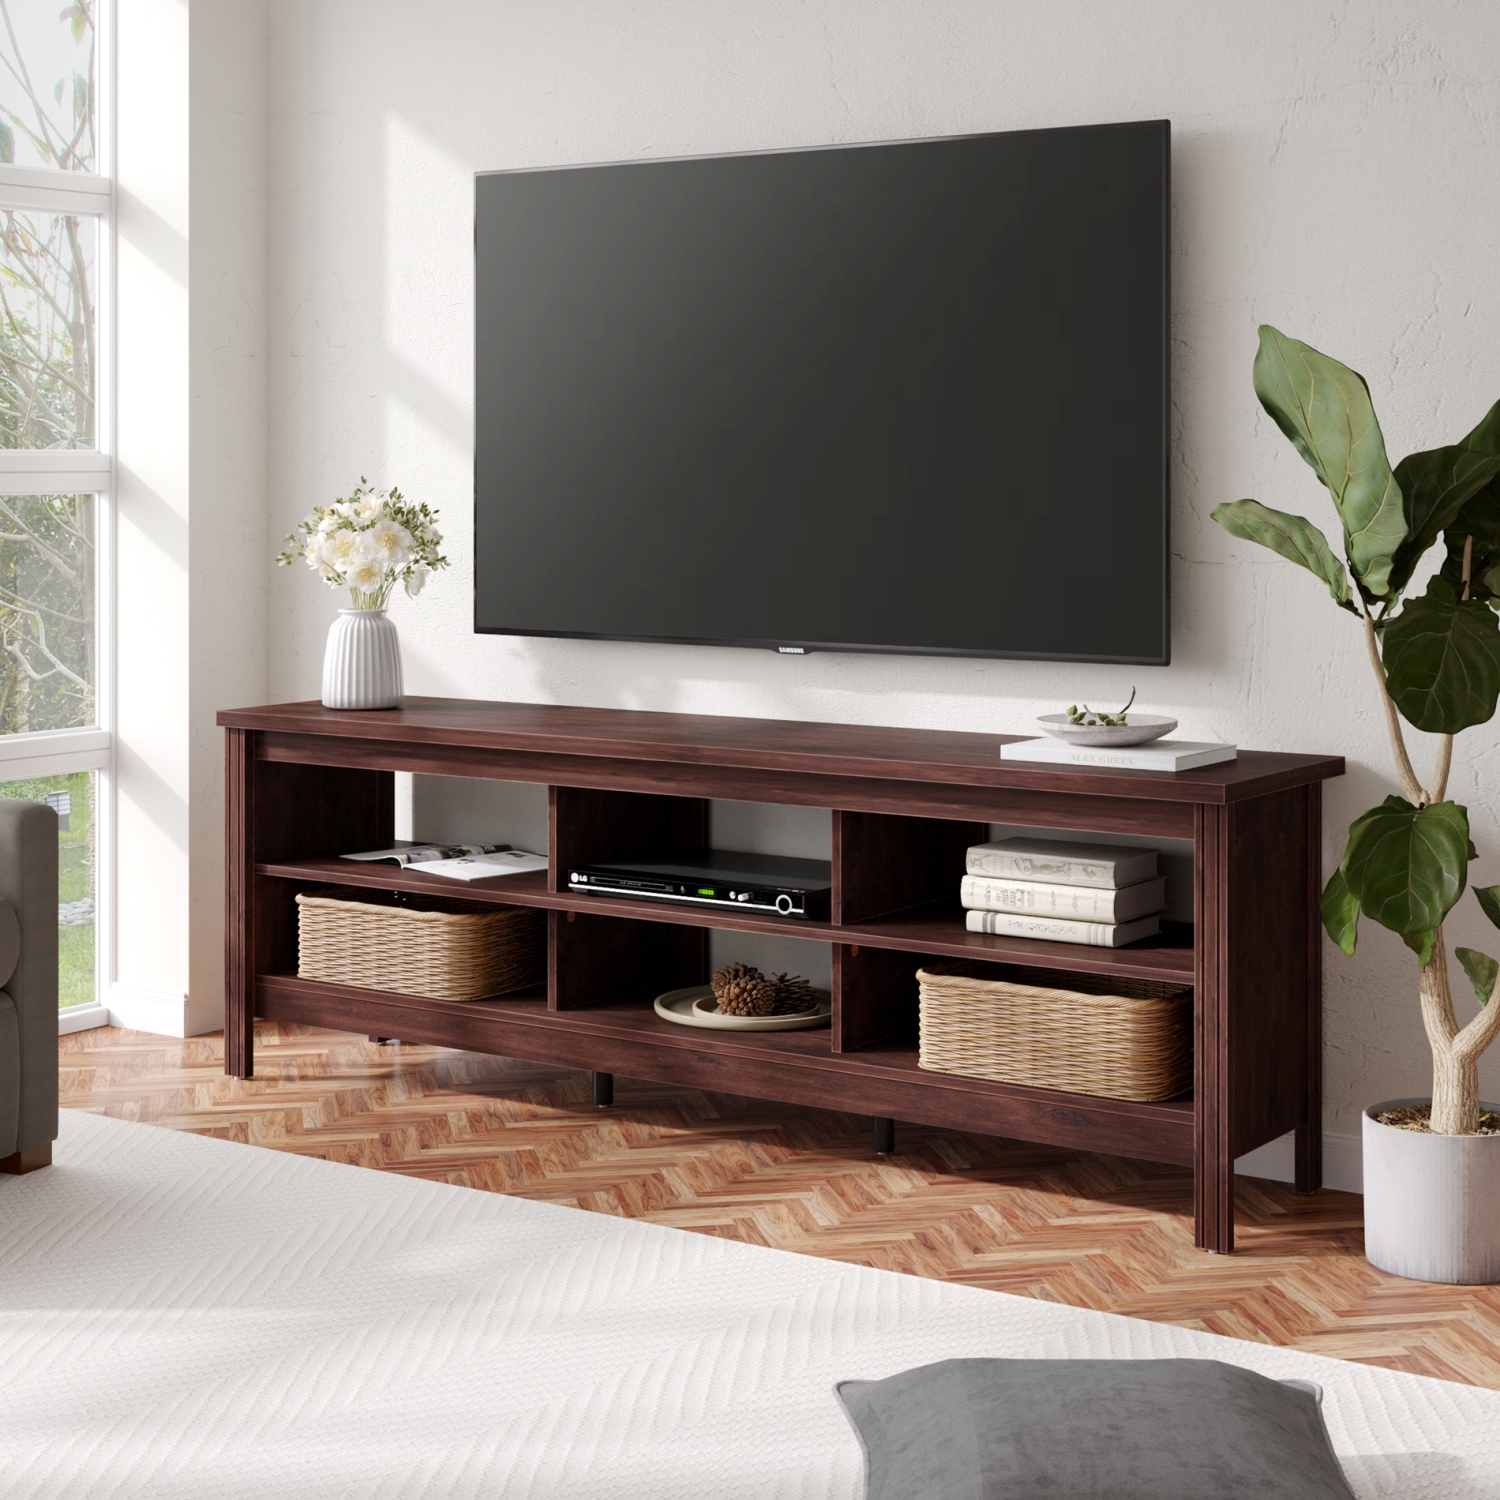 WAMPAT TV Stand for 75 65 inch TV Entertainment Center,Brown TV Console with 6 Storages for Bedroom,70 inch Wood Media Table for Living Room